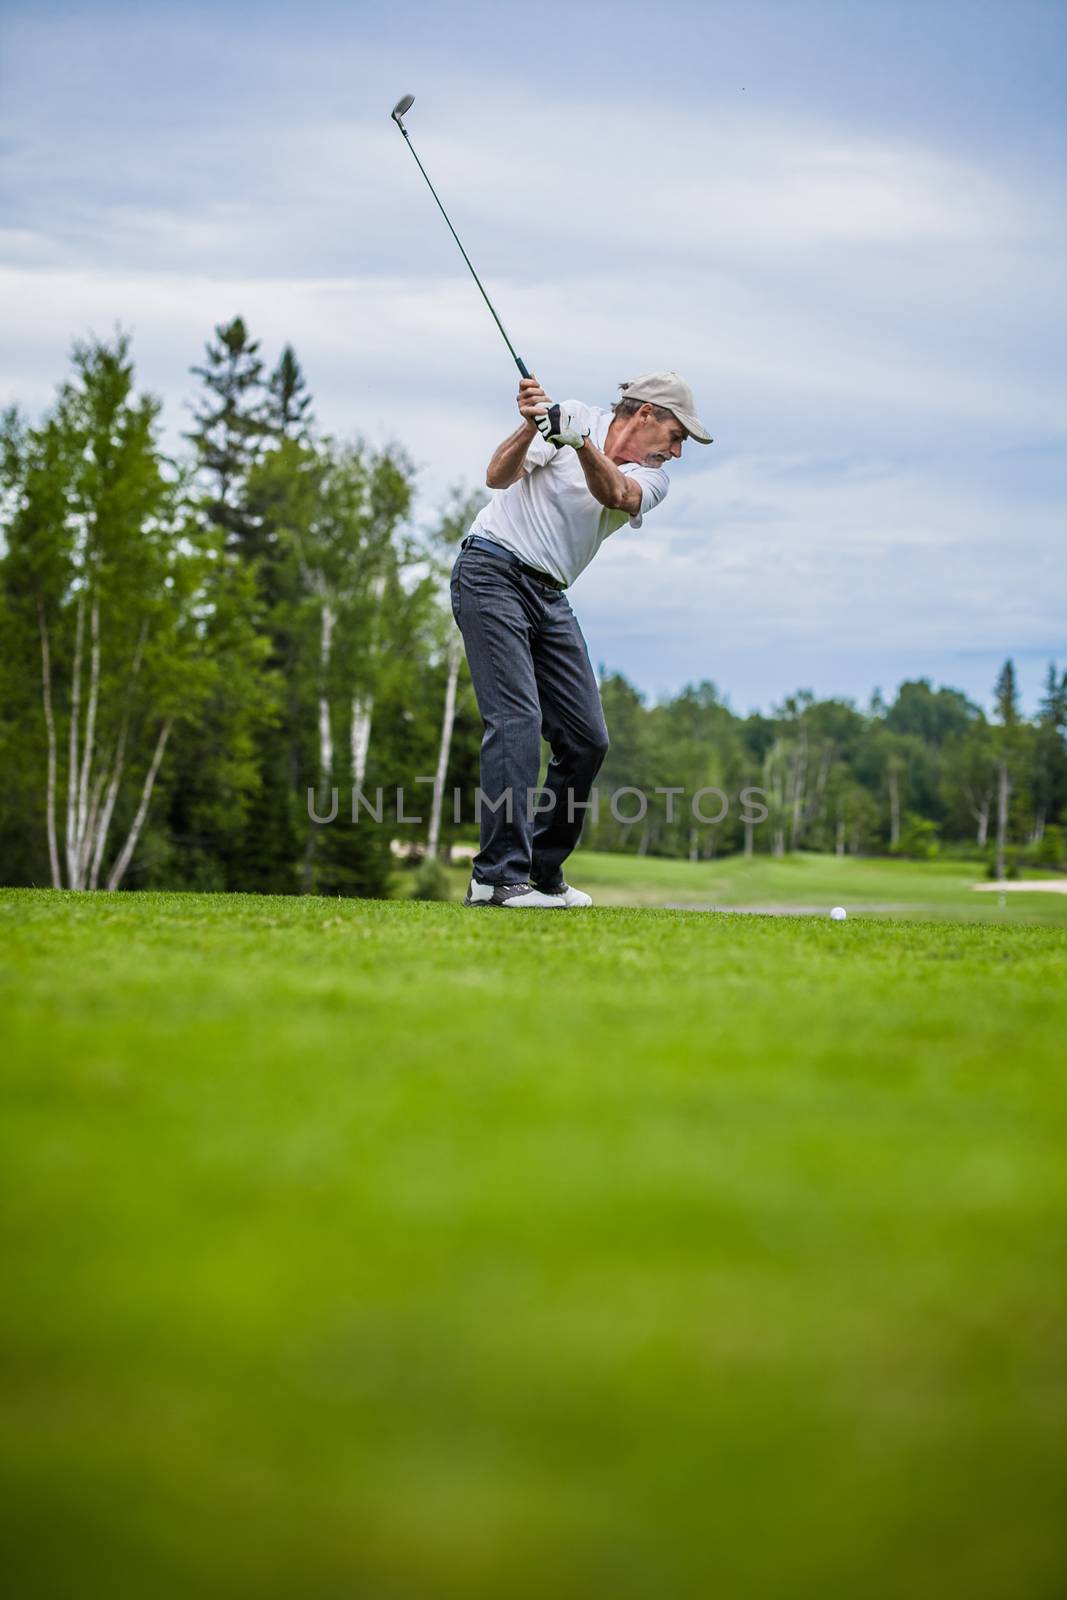 Mature Golfer on a Golf Course Taking a Swing on the Start (with room for your text)